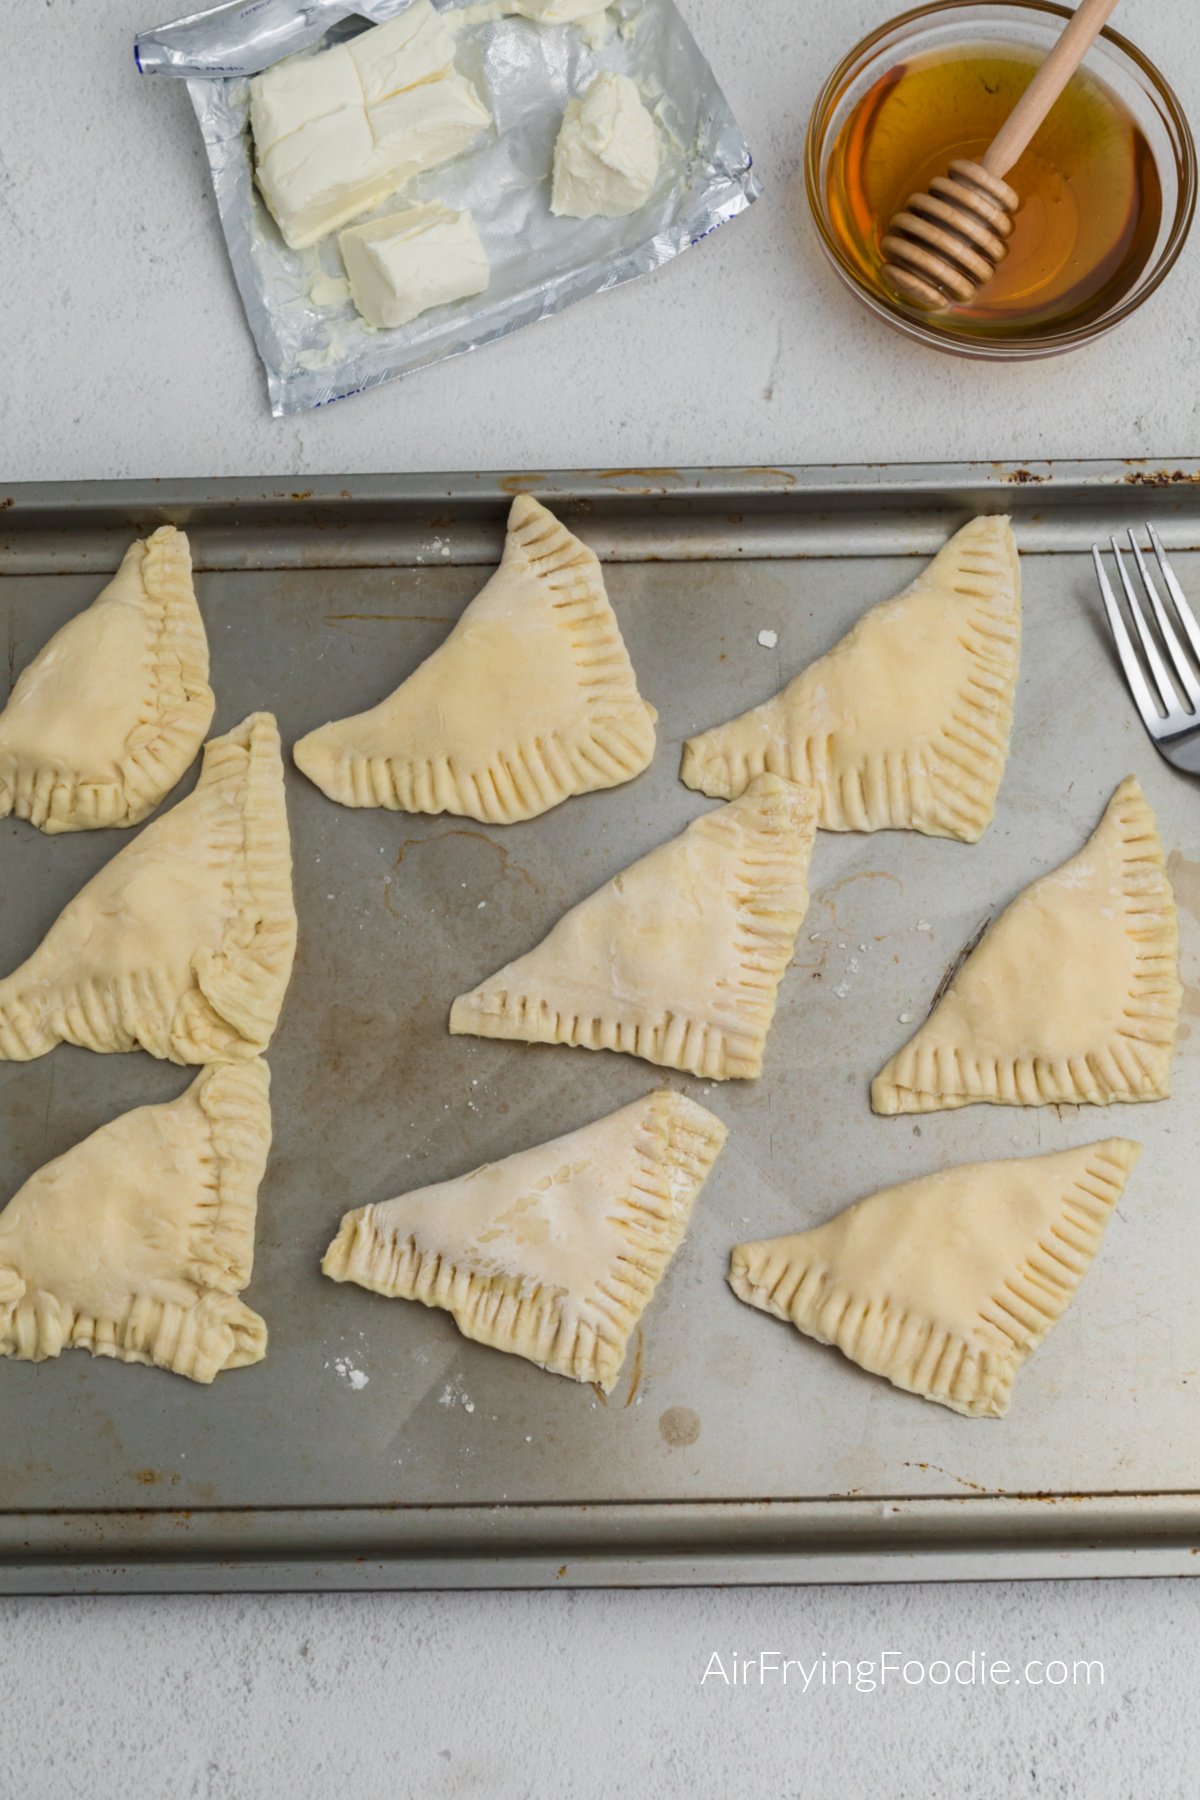 Cream cheese puff pastry folded over and pinched with a fork, ready to air fry.